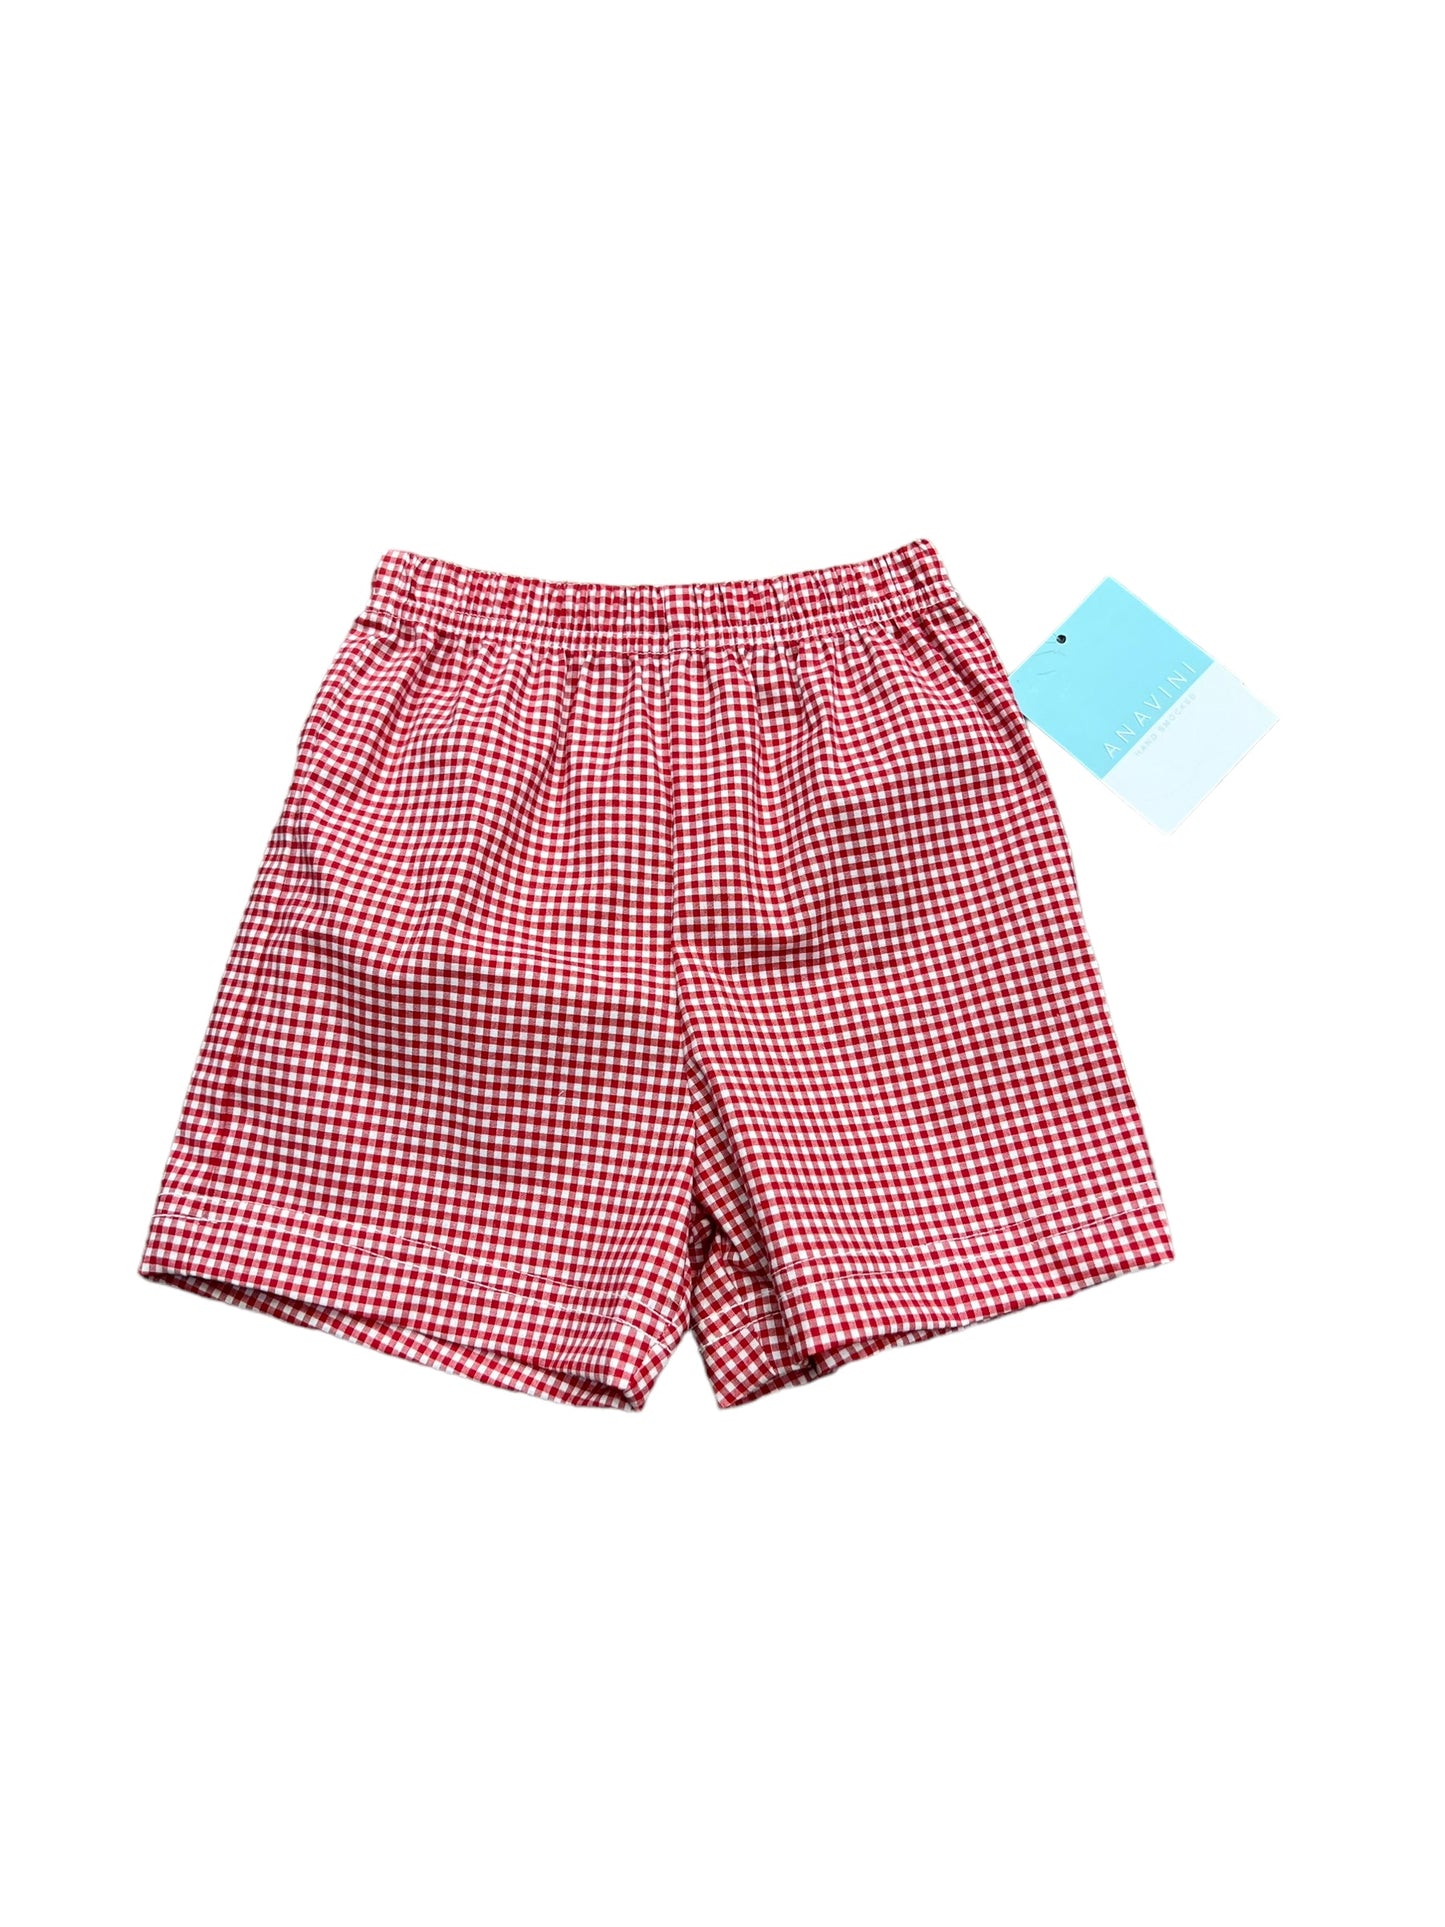 Red gingham shorts